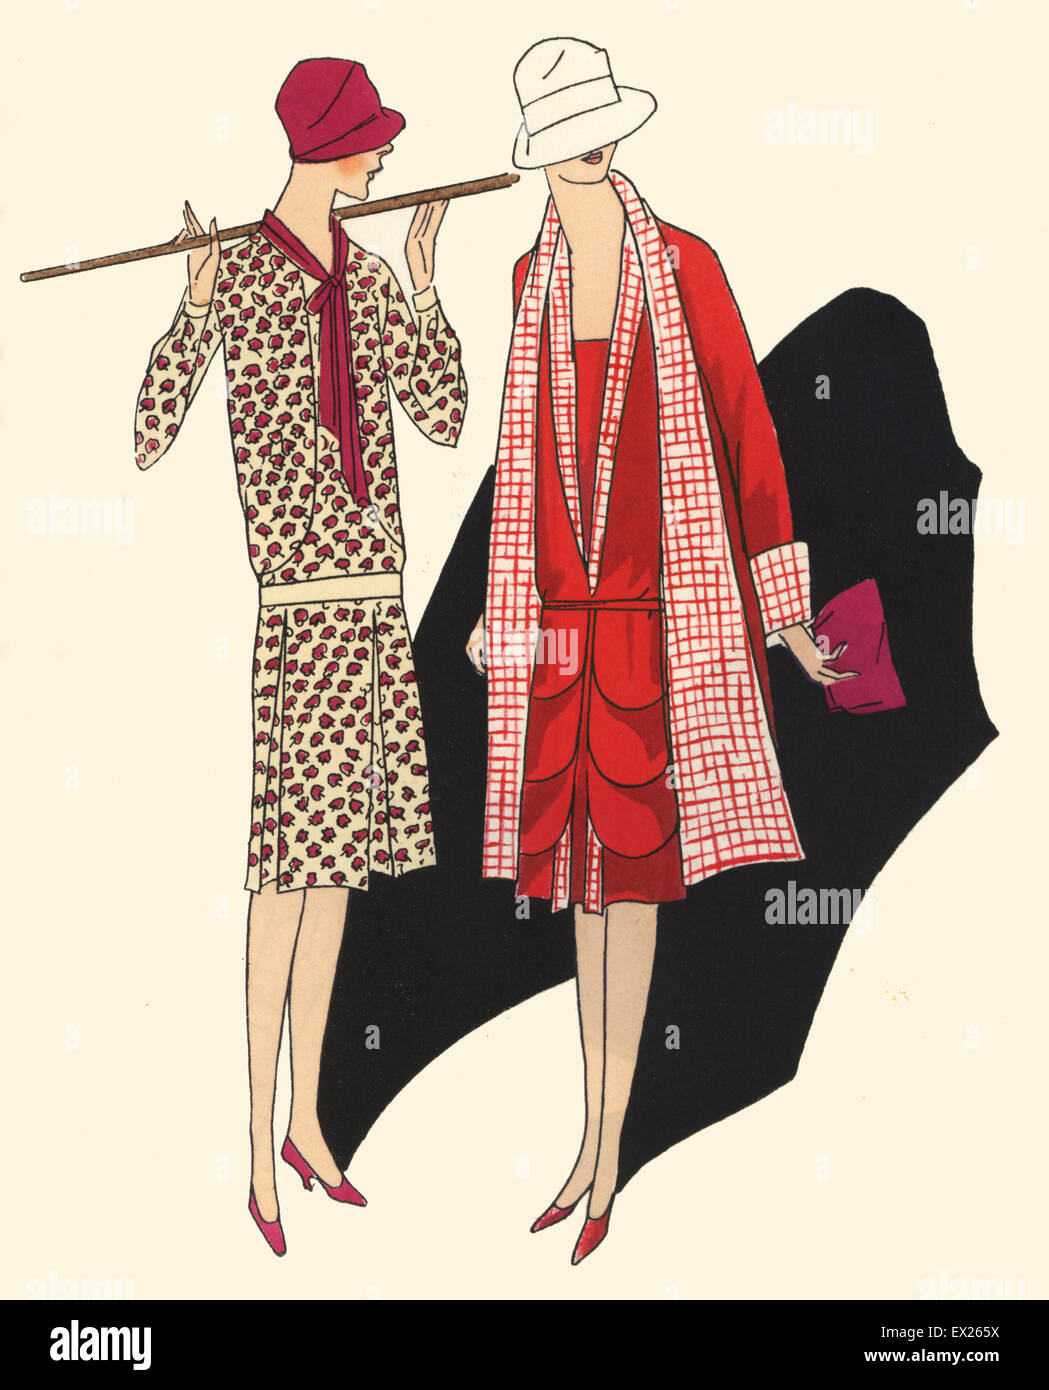 Woman in sports dress of printed silk, and woman in afternoon ensemble of crepe de chine with reversible linen coat. Lithograph with pochoir (stencil) handcolour from the luxury fashion magazine Art, Gout, Beaute, Paris, 1926. Stock Photo